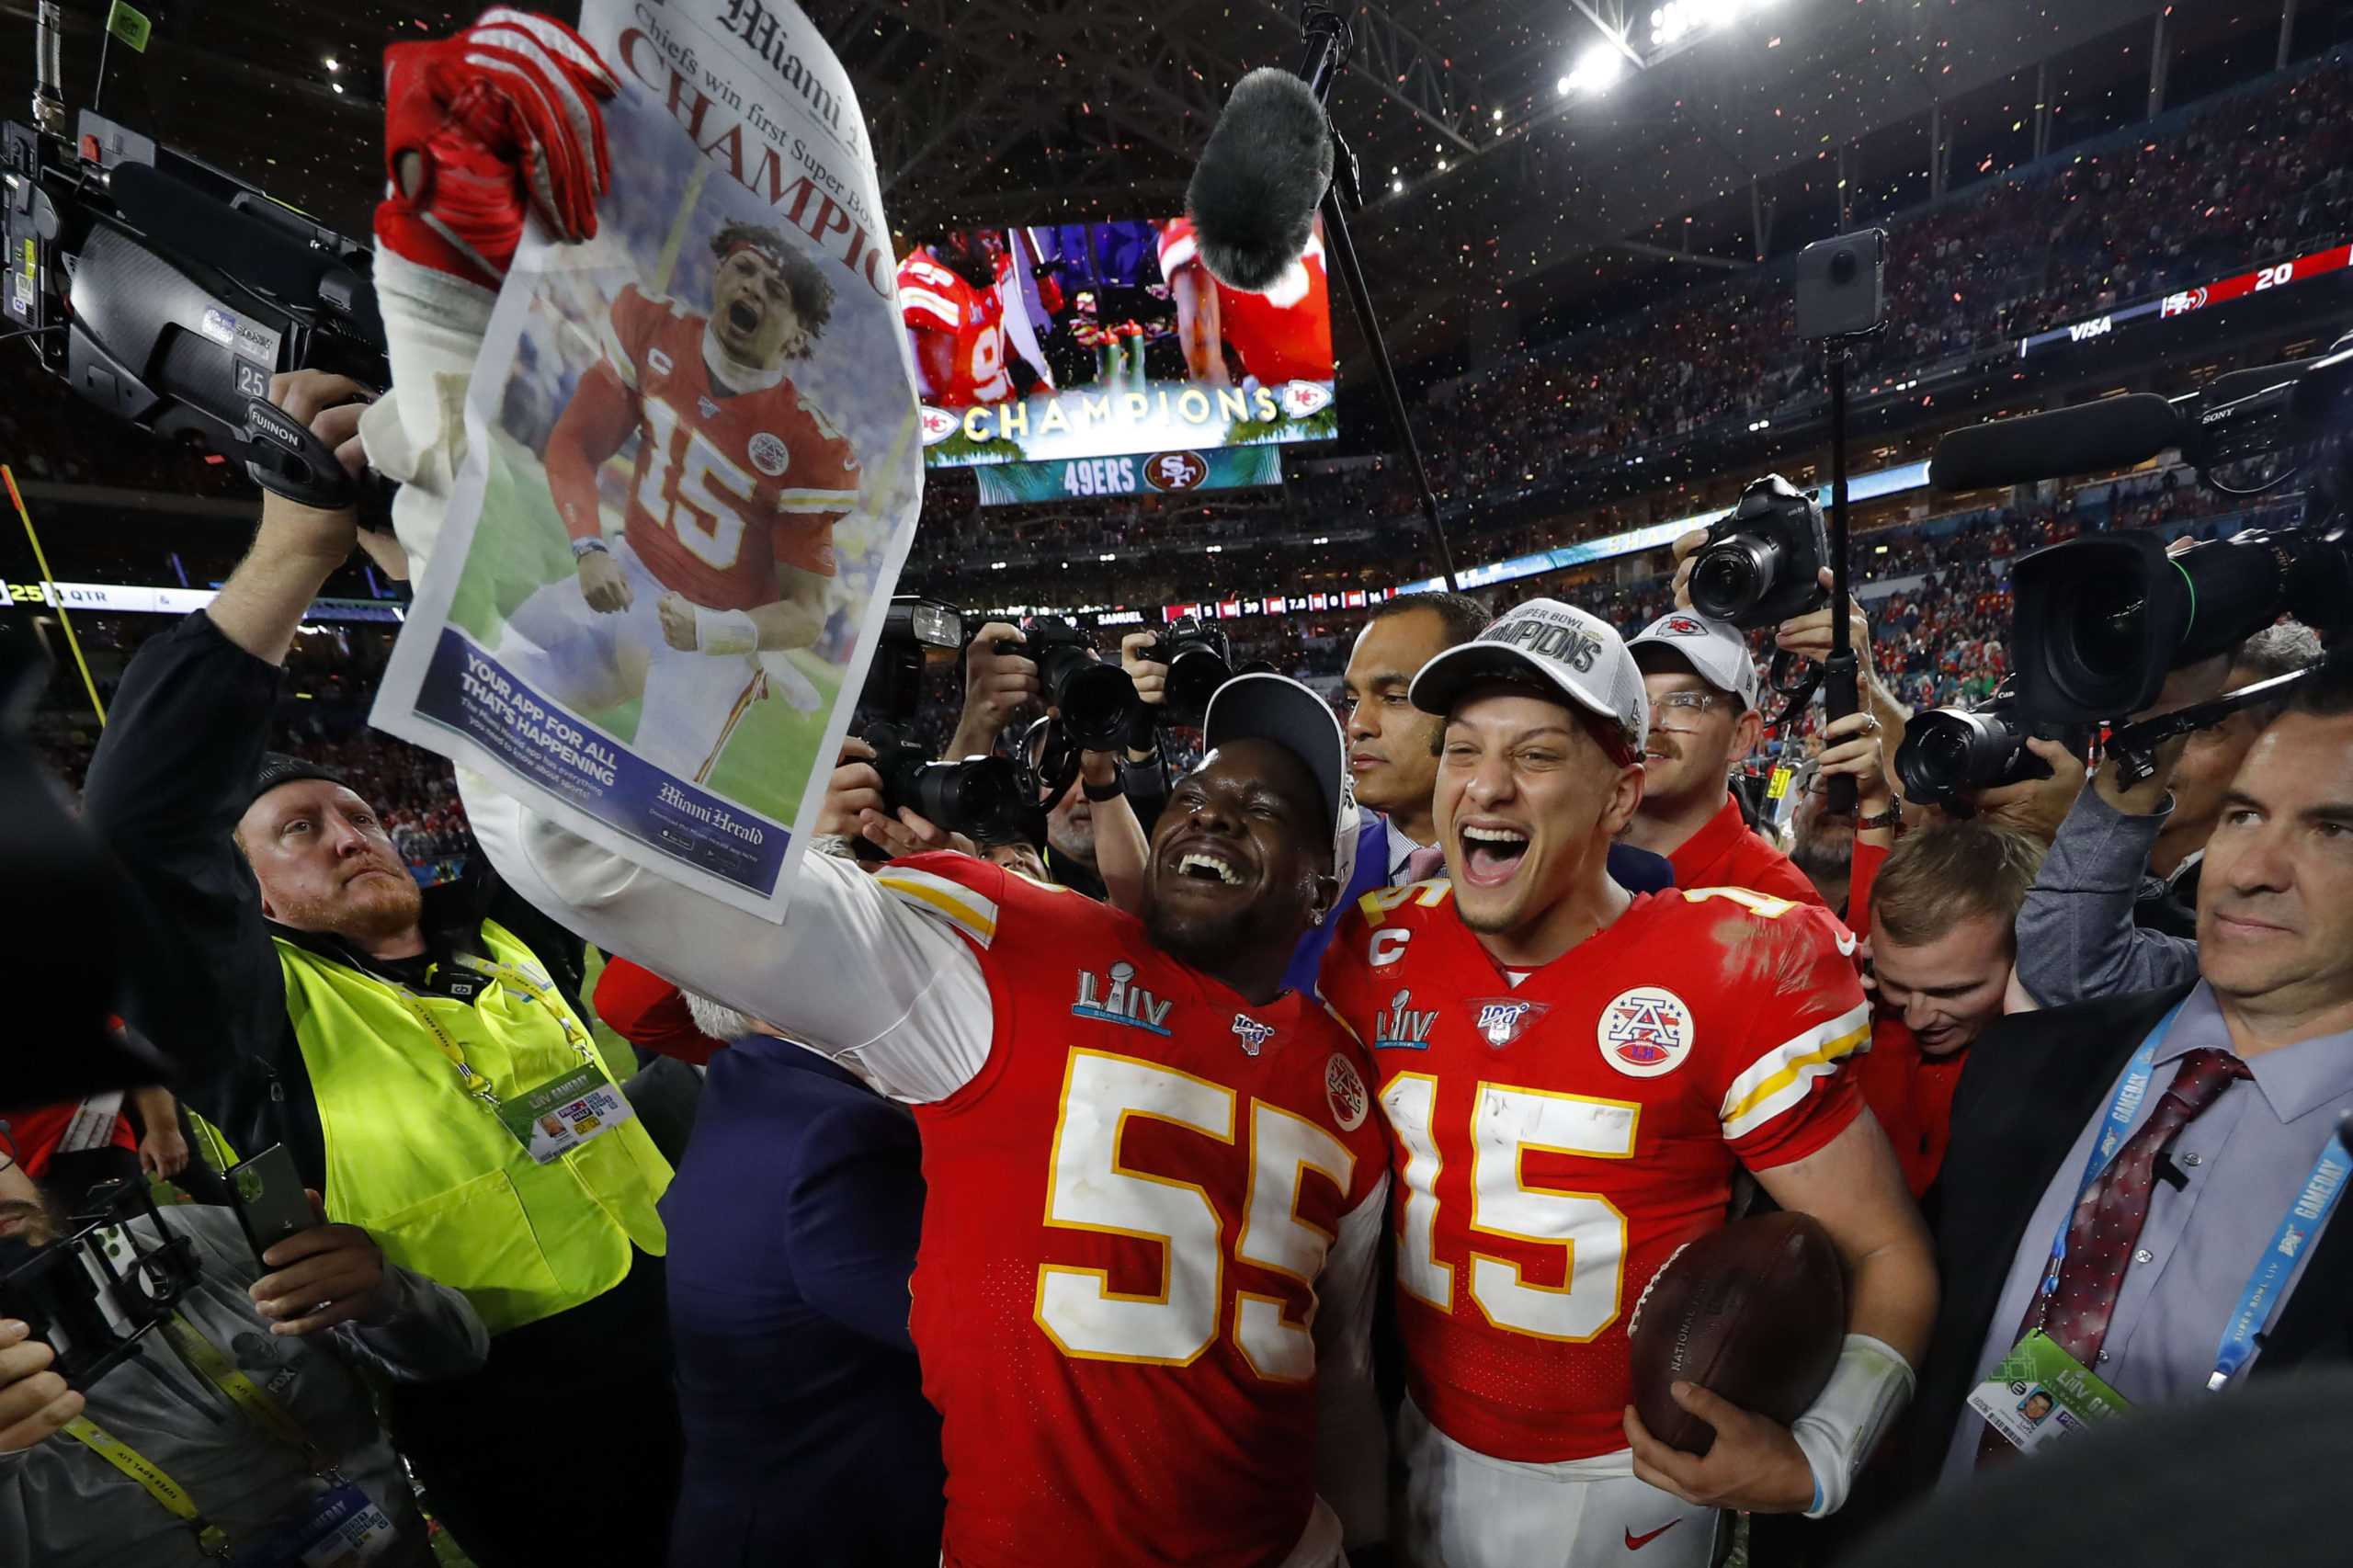  Super Bowl LIV Rigged: NFL Fabricated a Chiefs Win